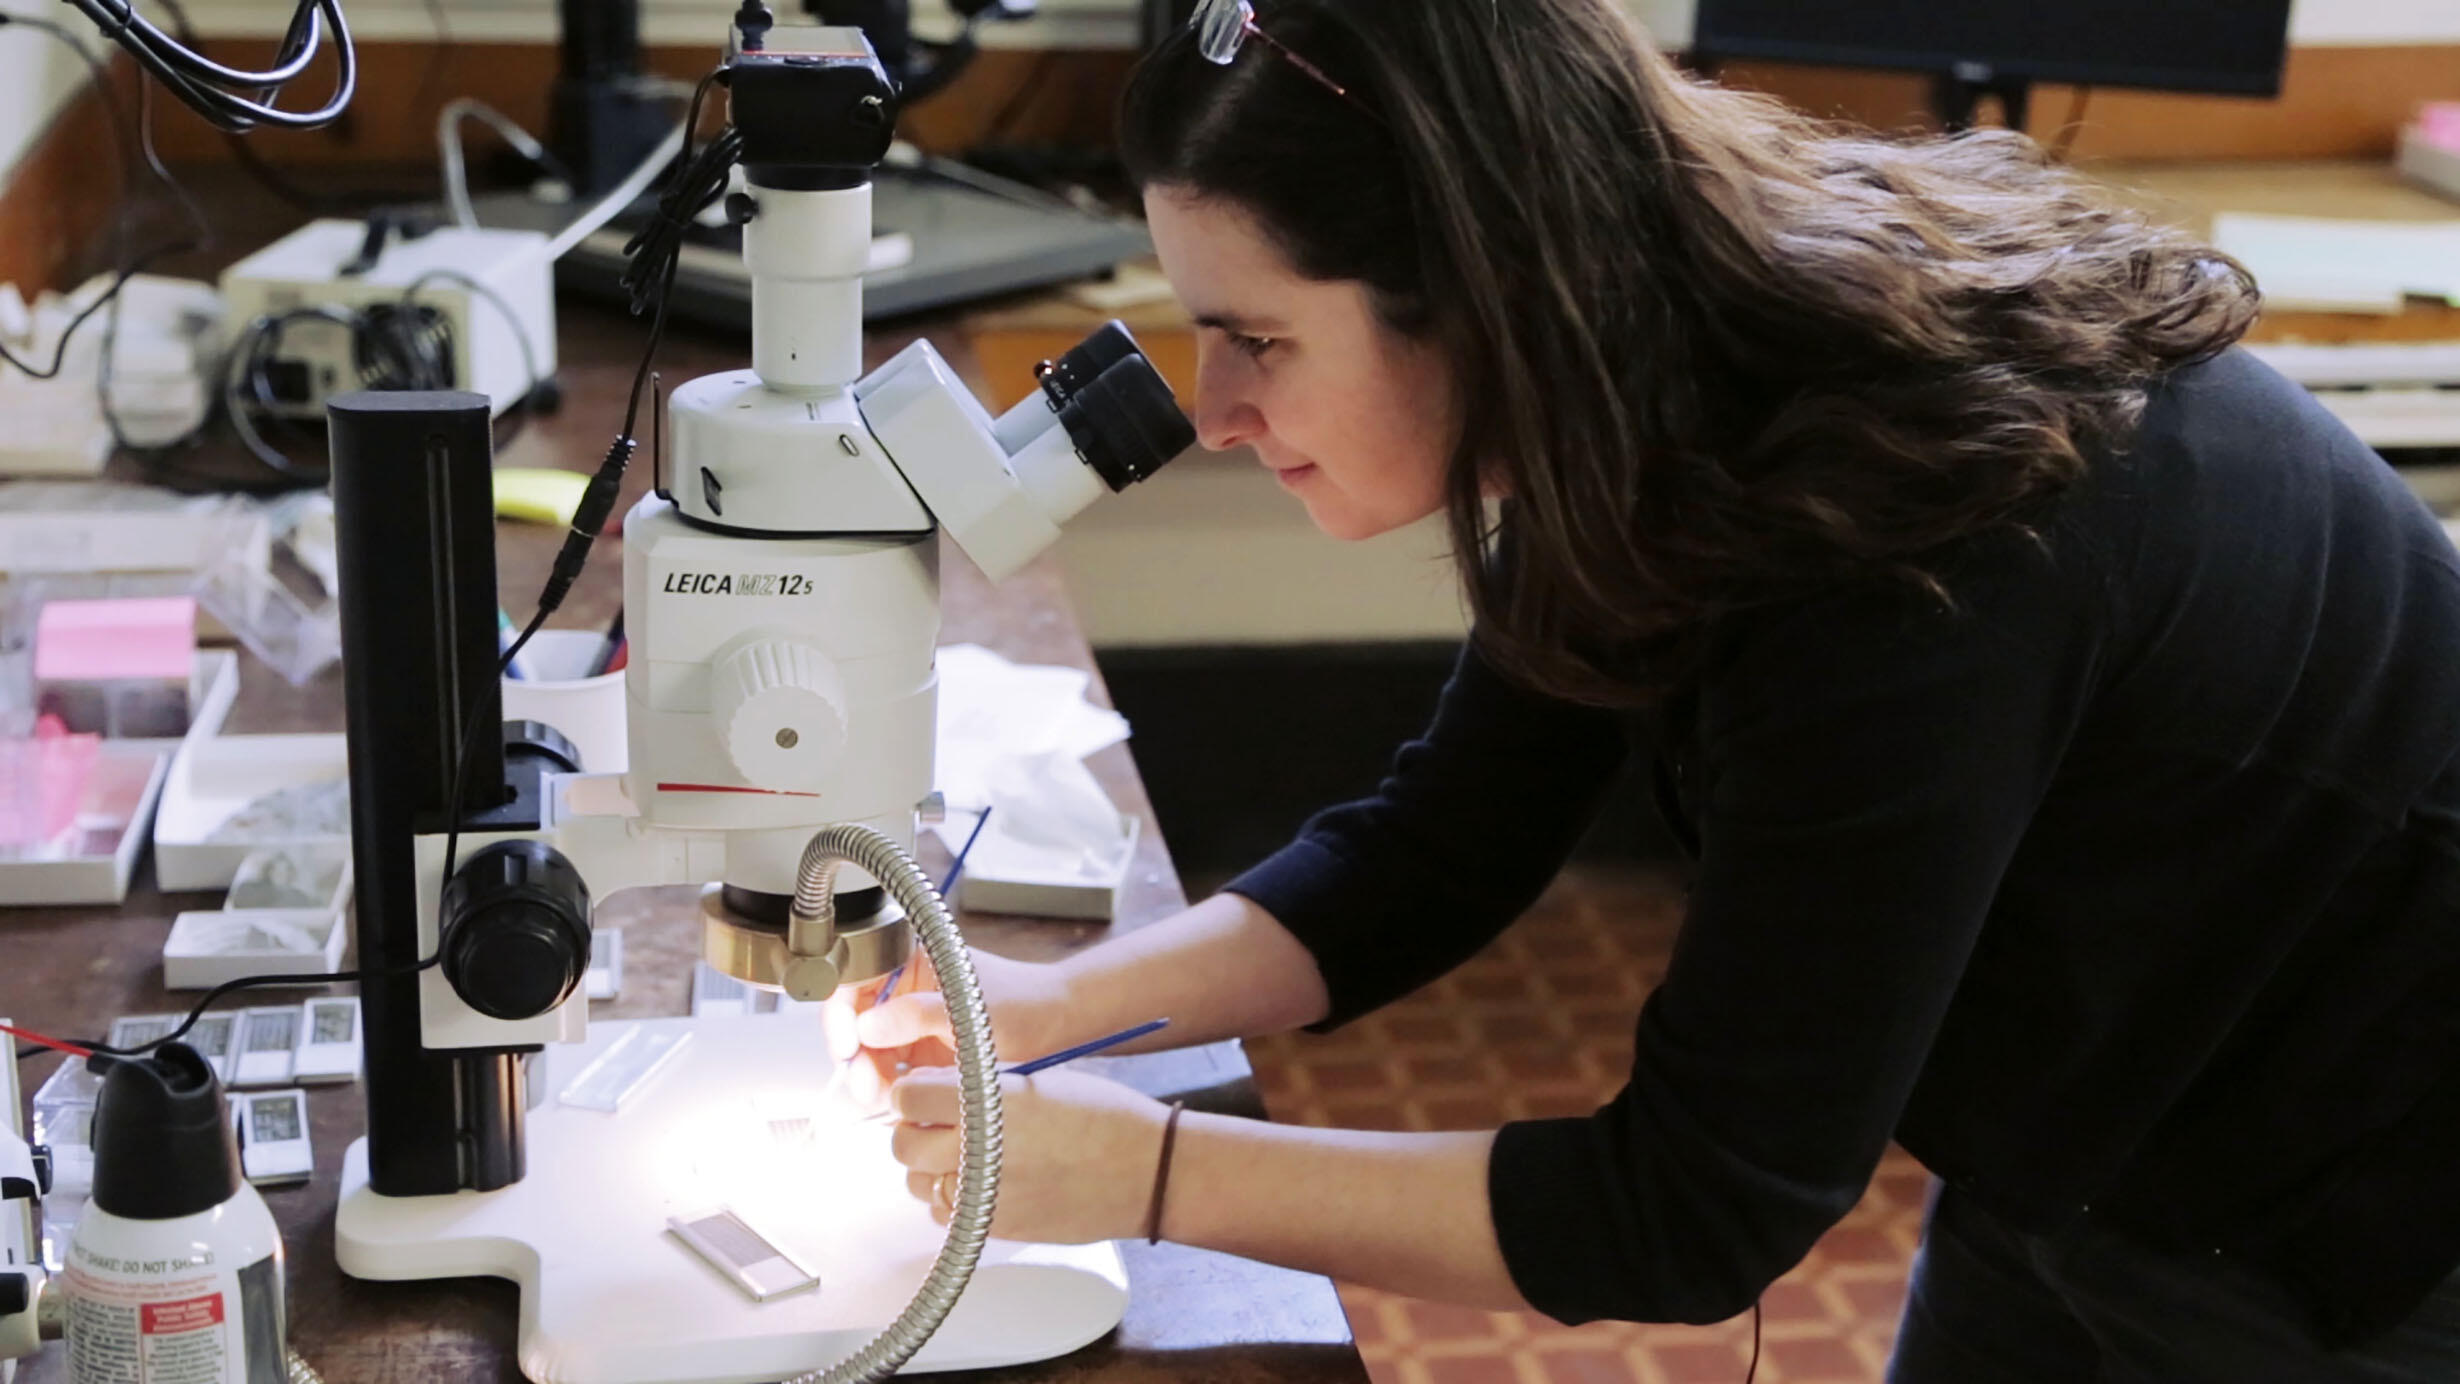 Melanie Hopkins, an associate curator in the Museum’s Division of Invertebrate Zoology, looking at specimens with a microscope.